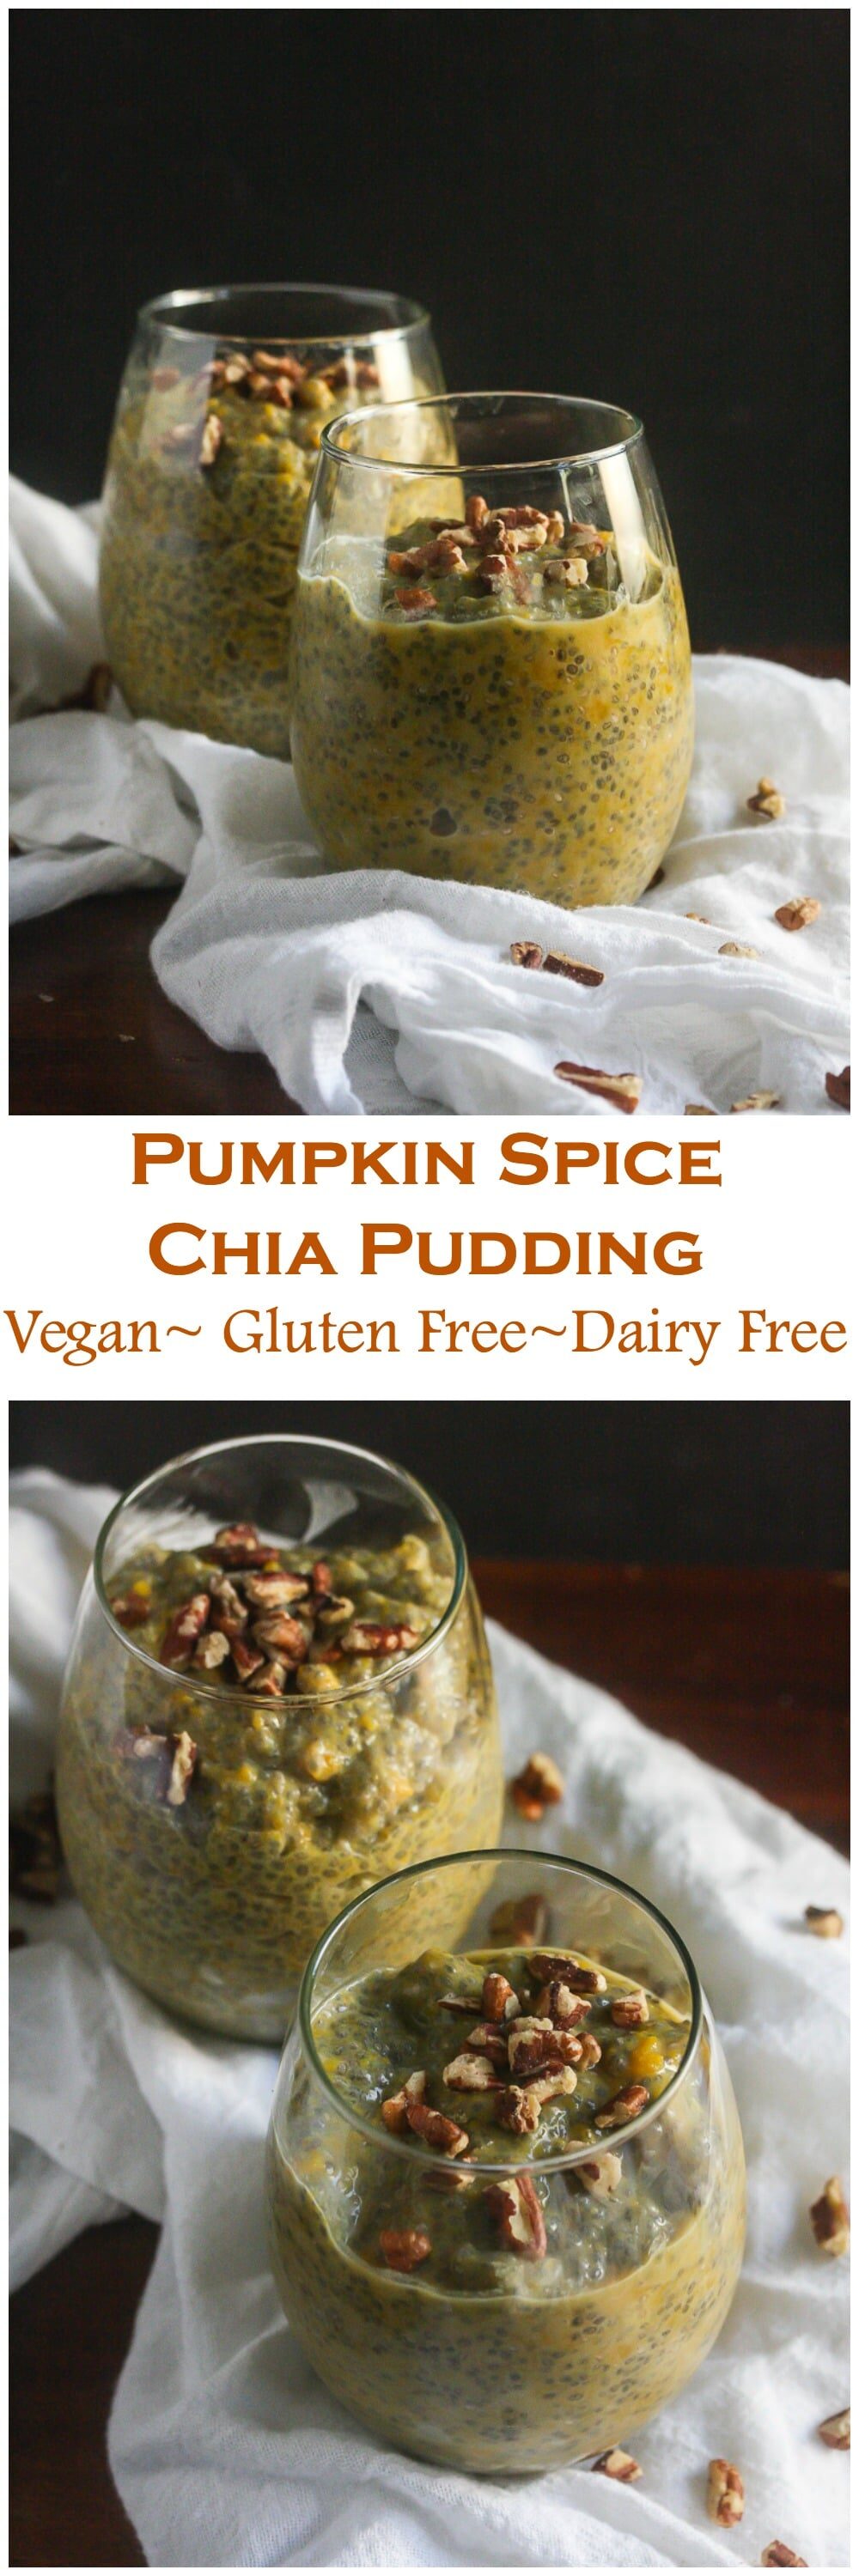 This Pumpkin Pie Chia Seed Pudding is packed with antioxidants, dairy-free, gluten-free and vegan!